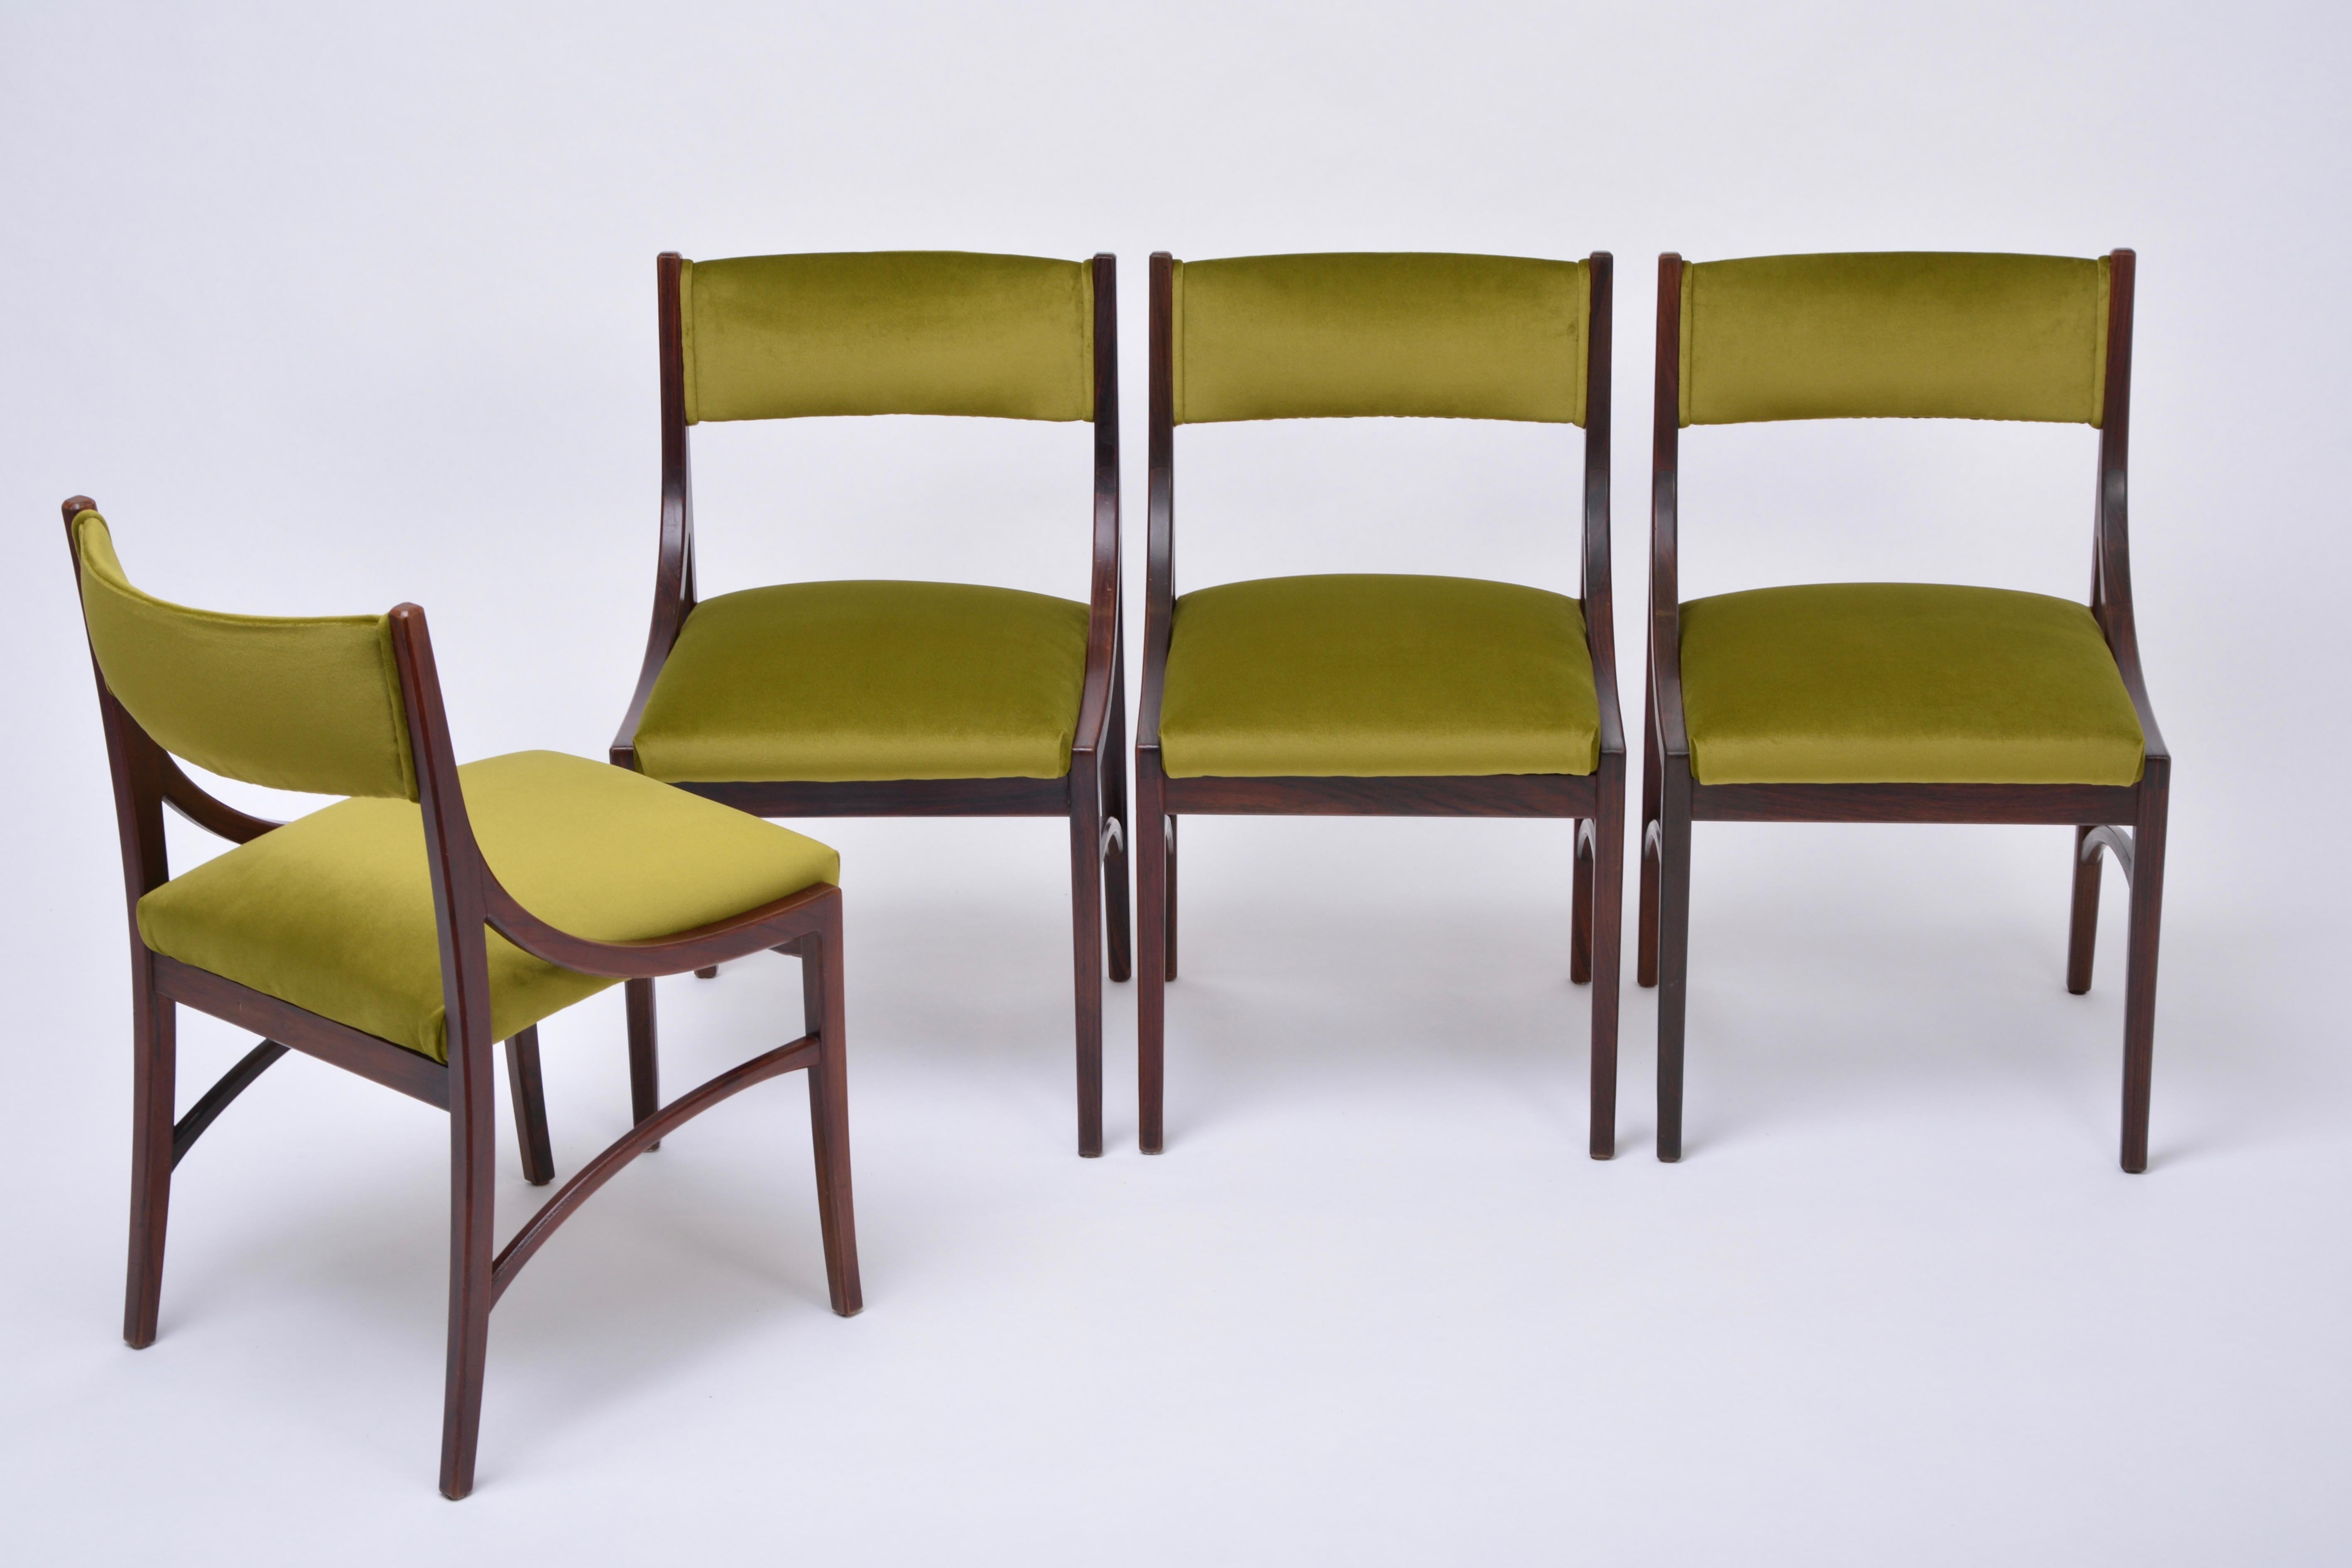 Italian Set of four Mid-Century Modern Green reupholstered Dining Chairs by Ico Parisi 